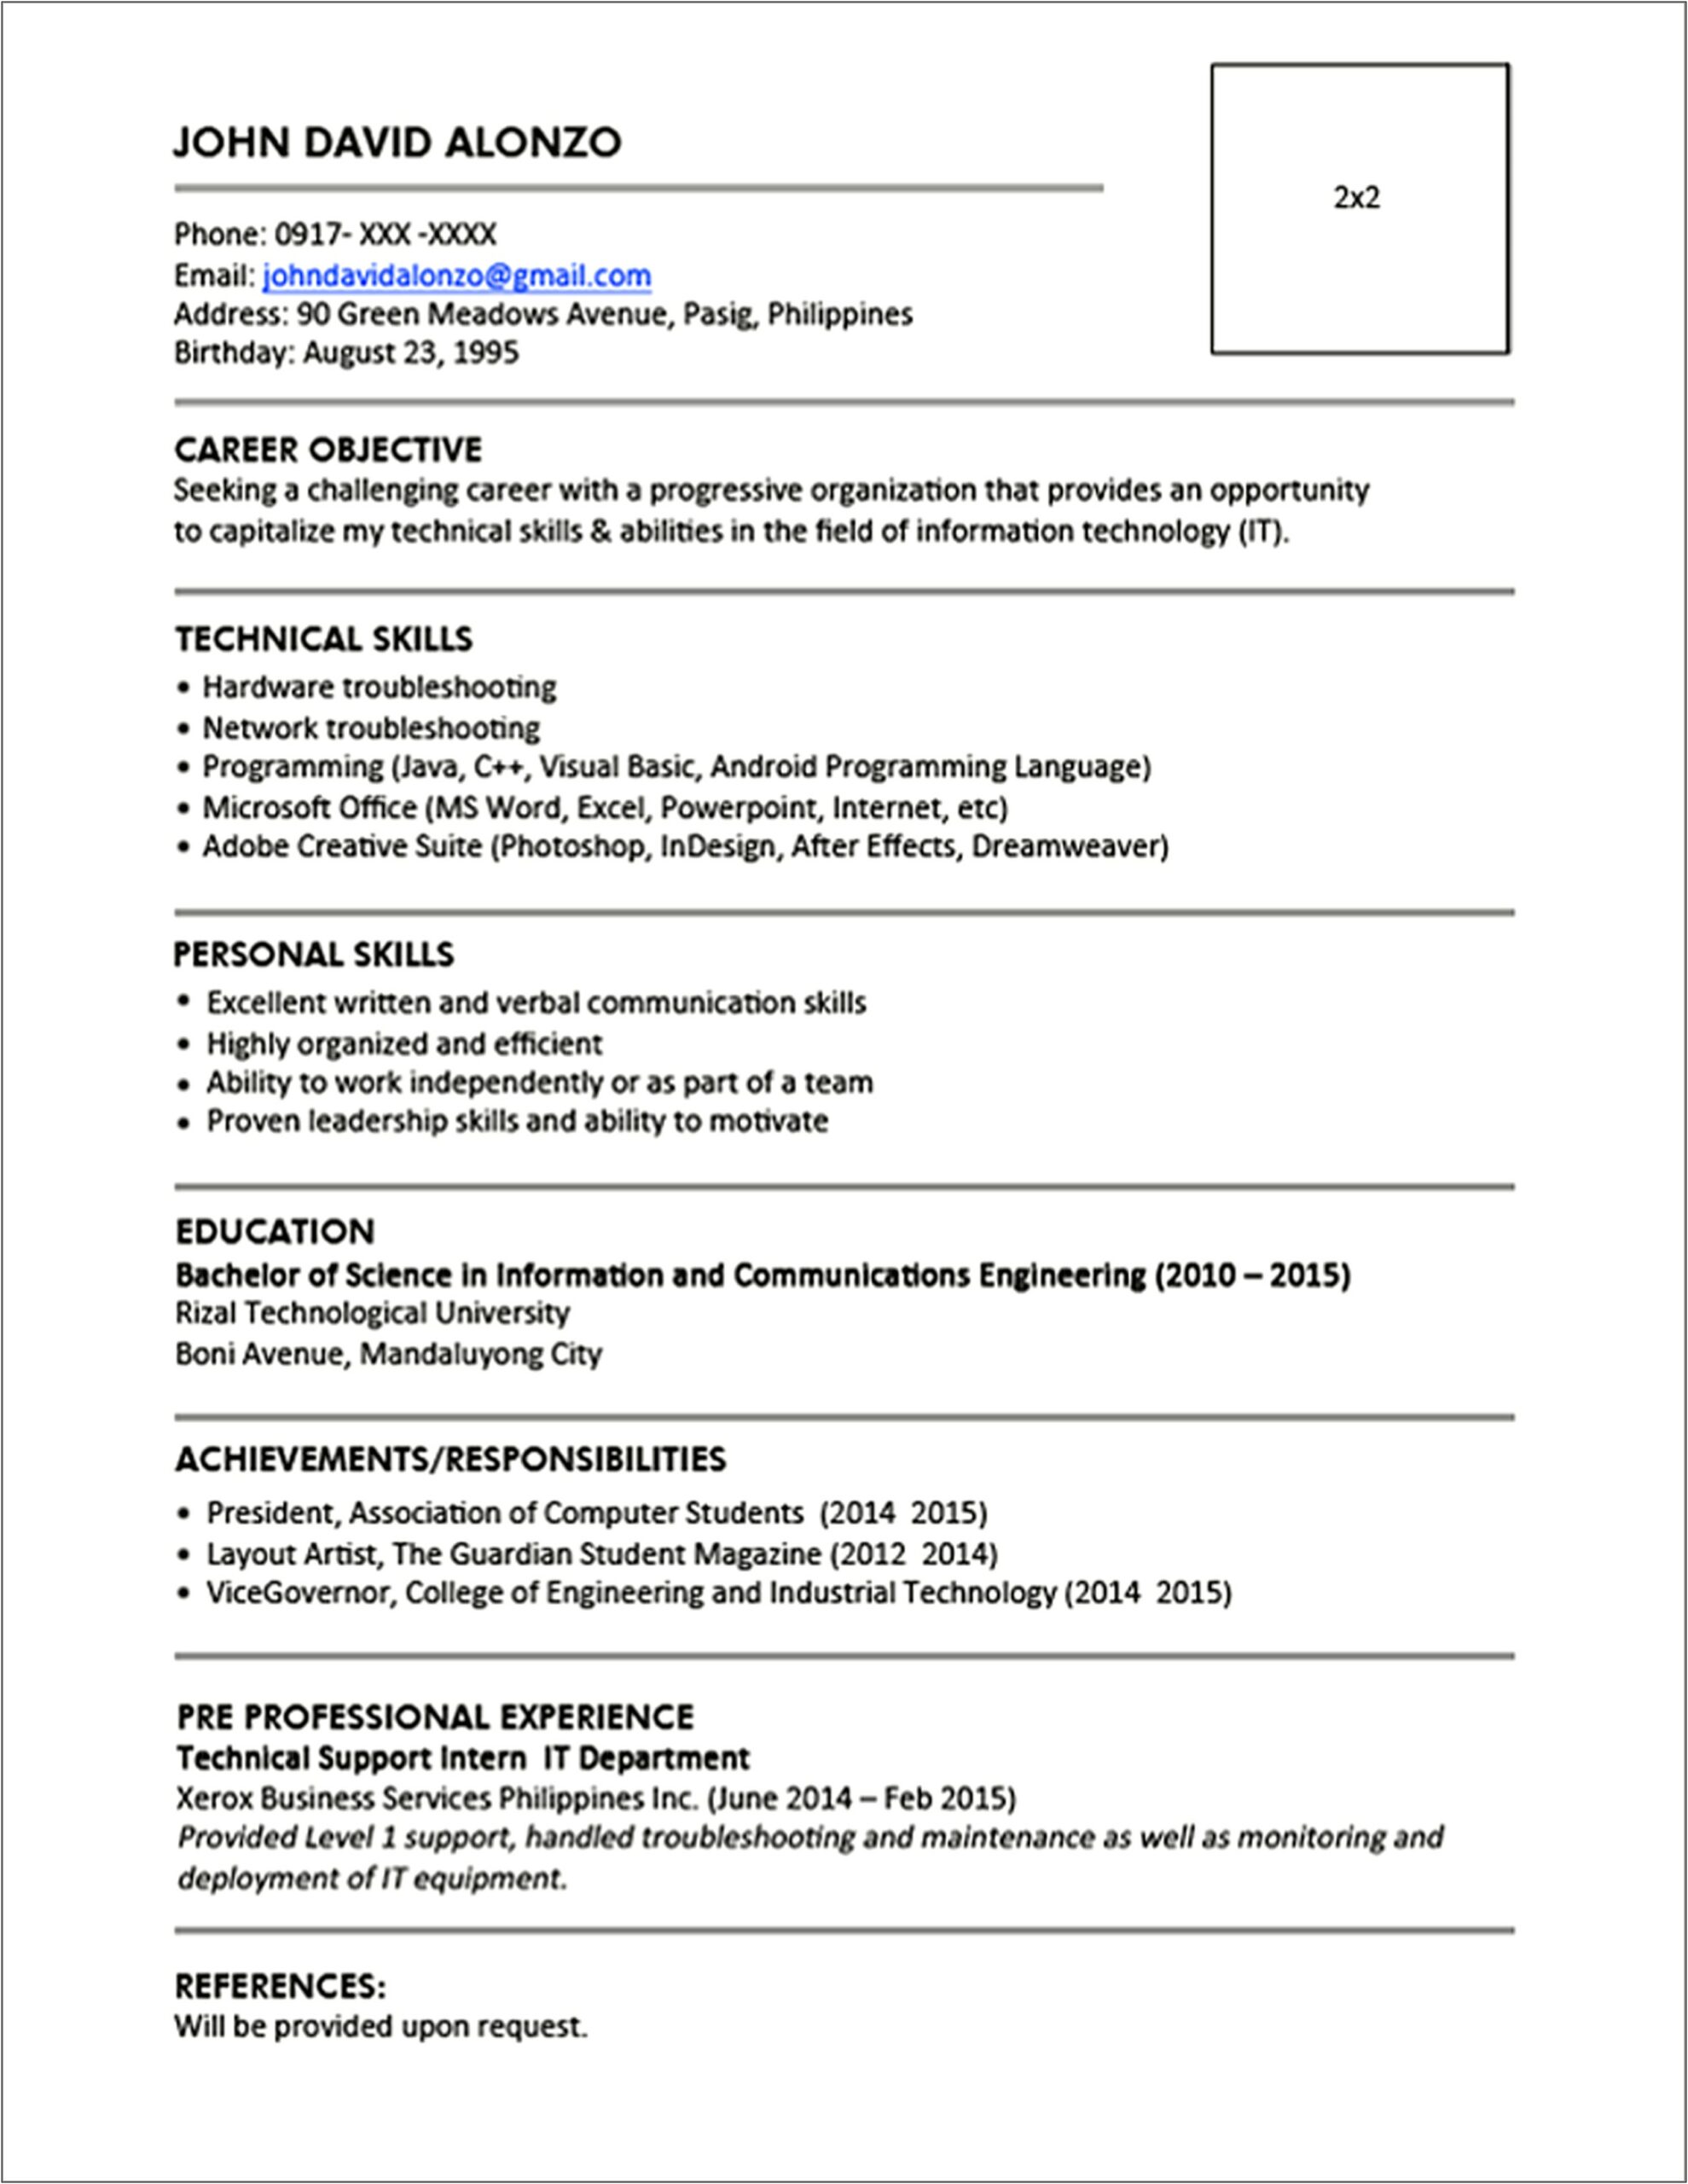 Type Responsibility And Achievements Sample Resume